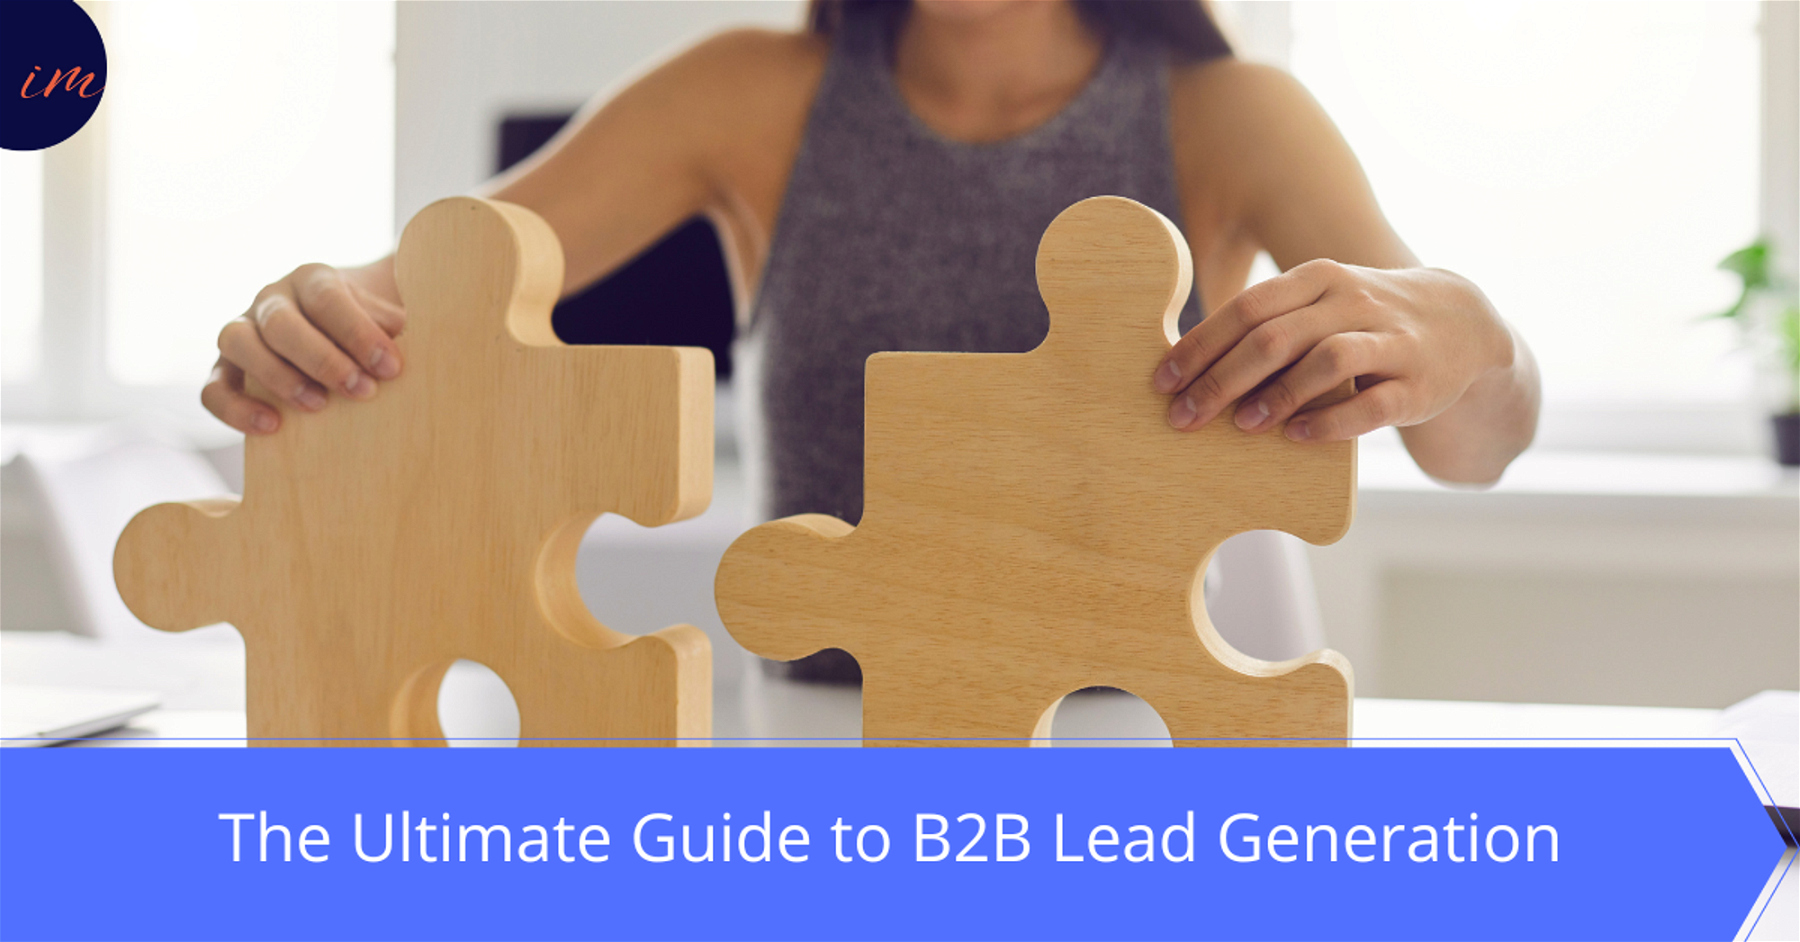 B2B Lead Generation: The Ultimate Guide 